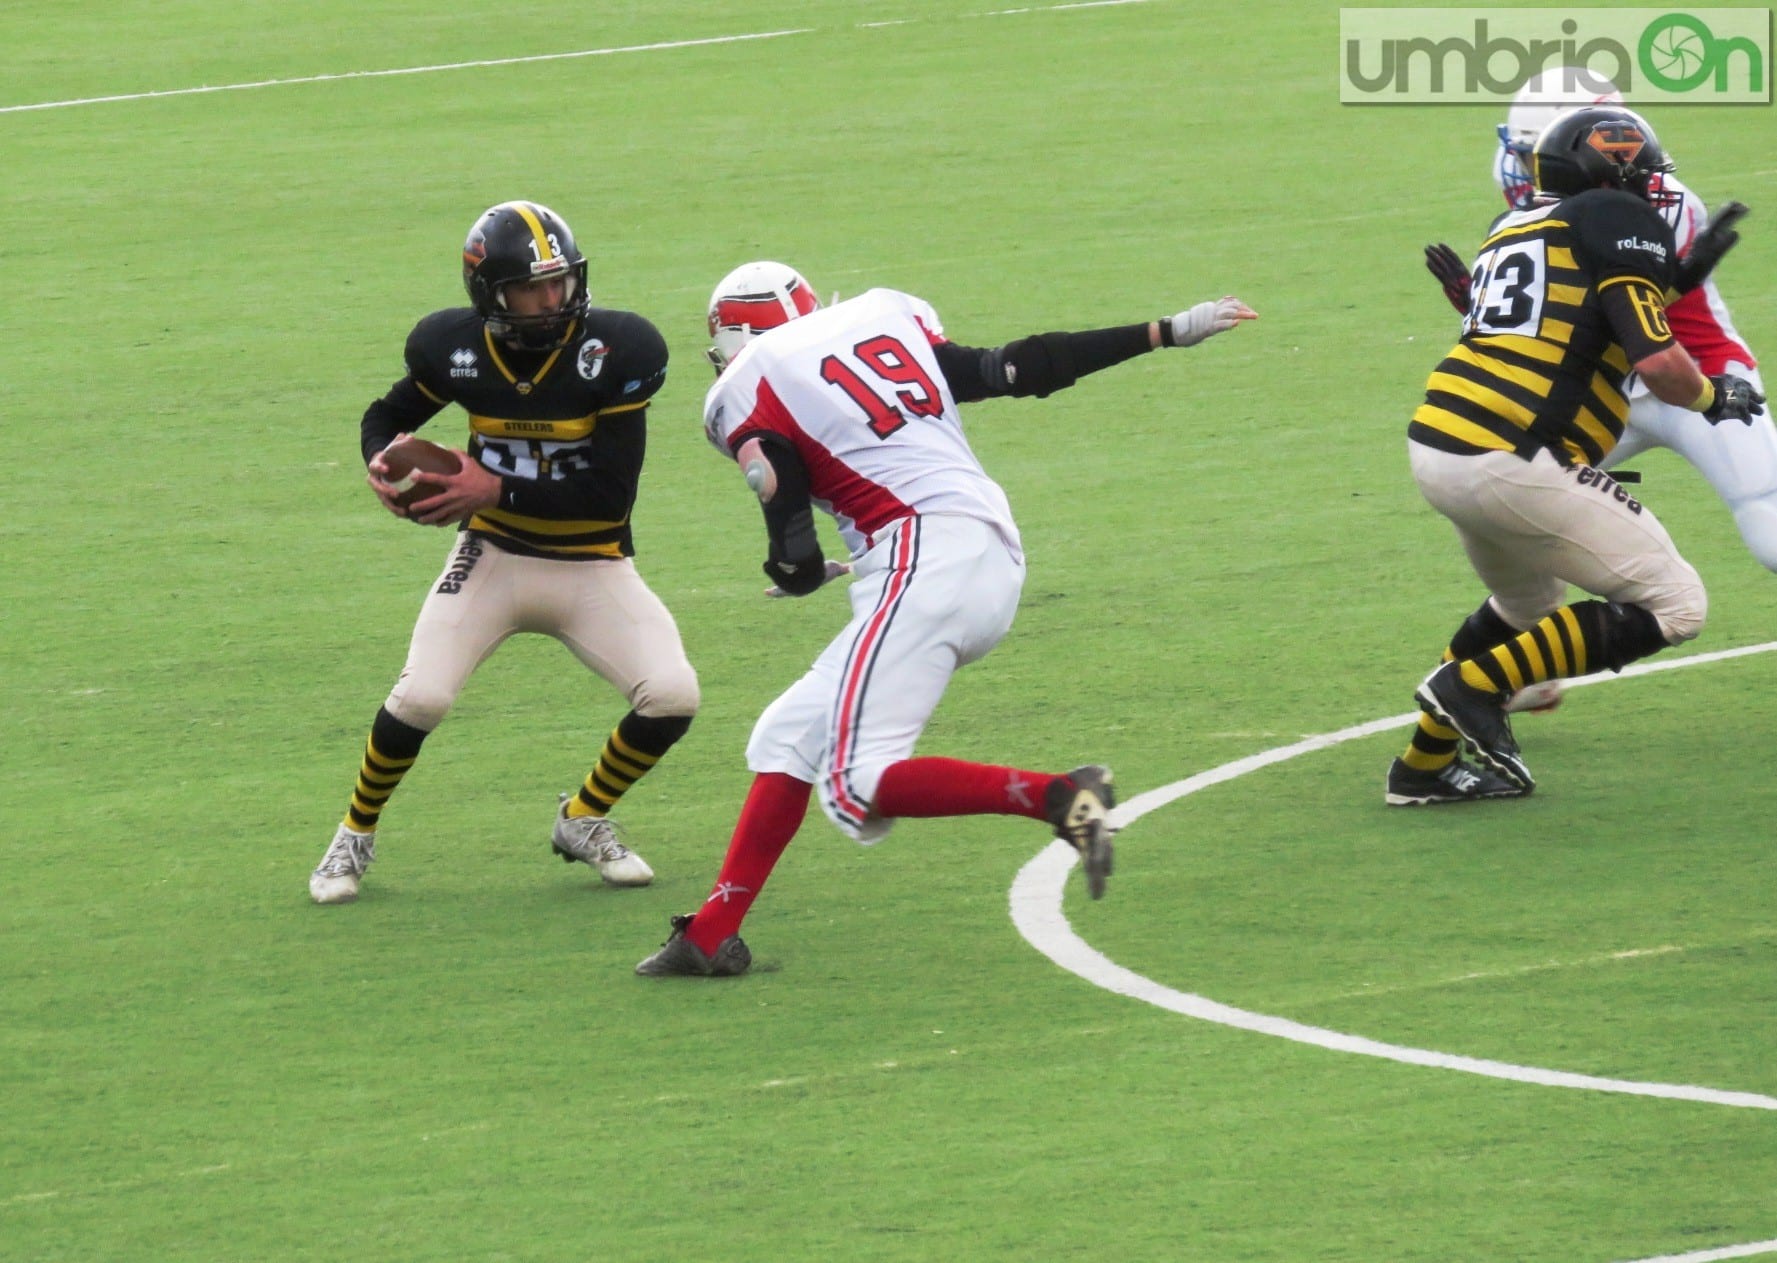 steelers grifoni football93 | umbriaON